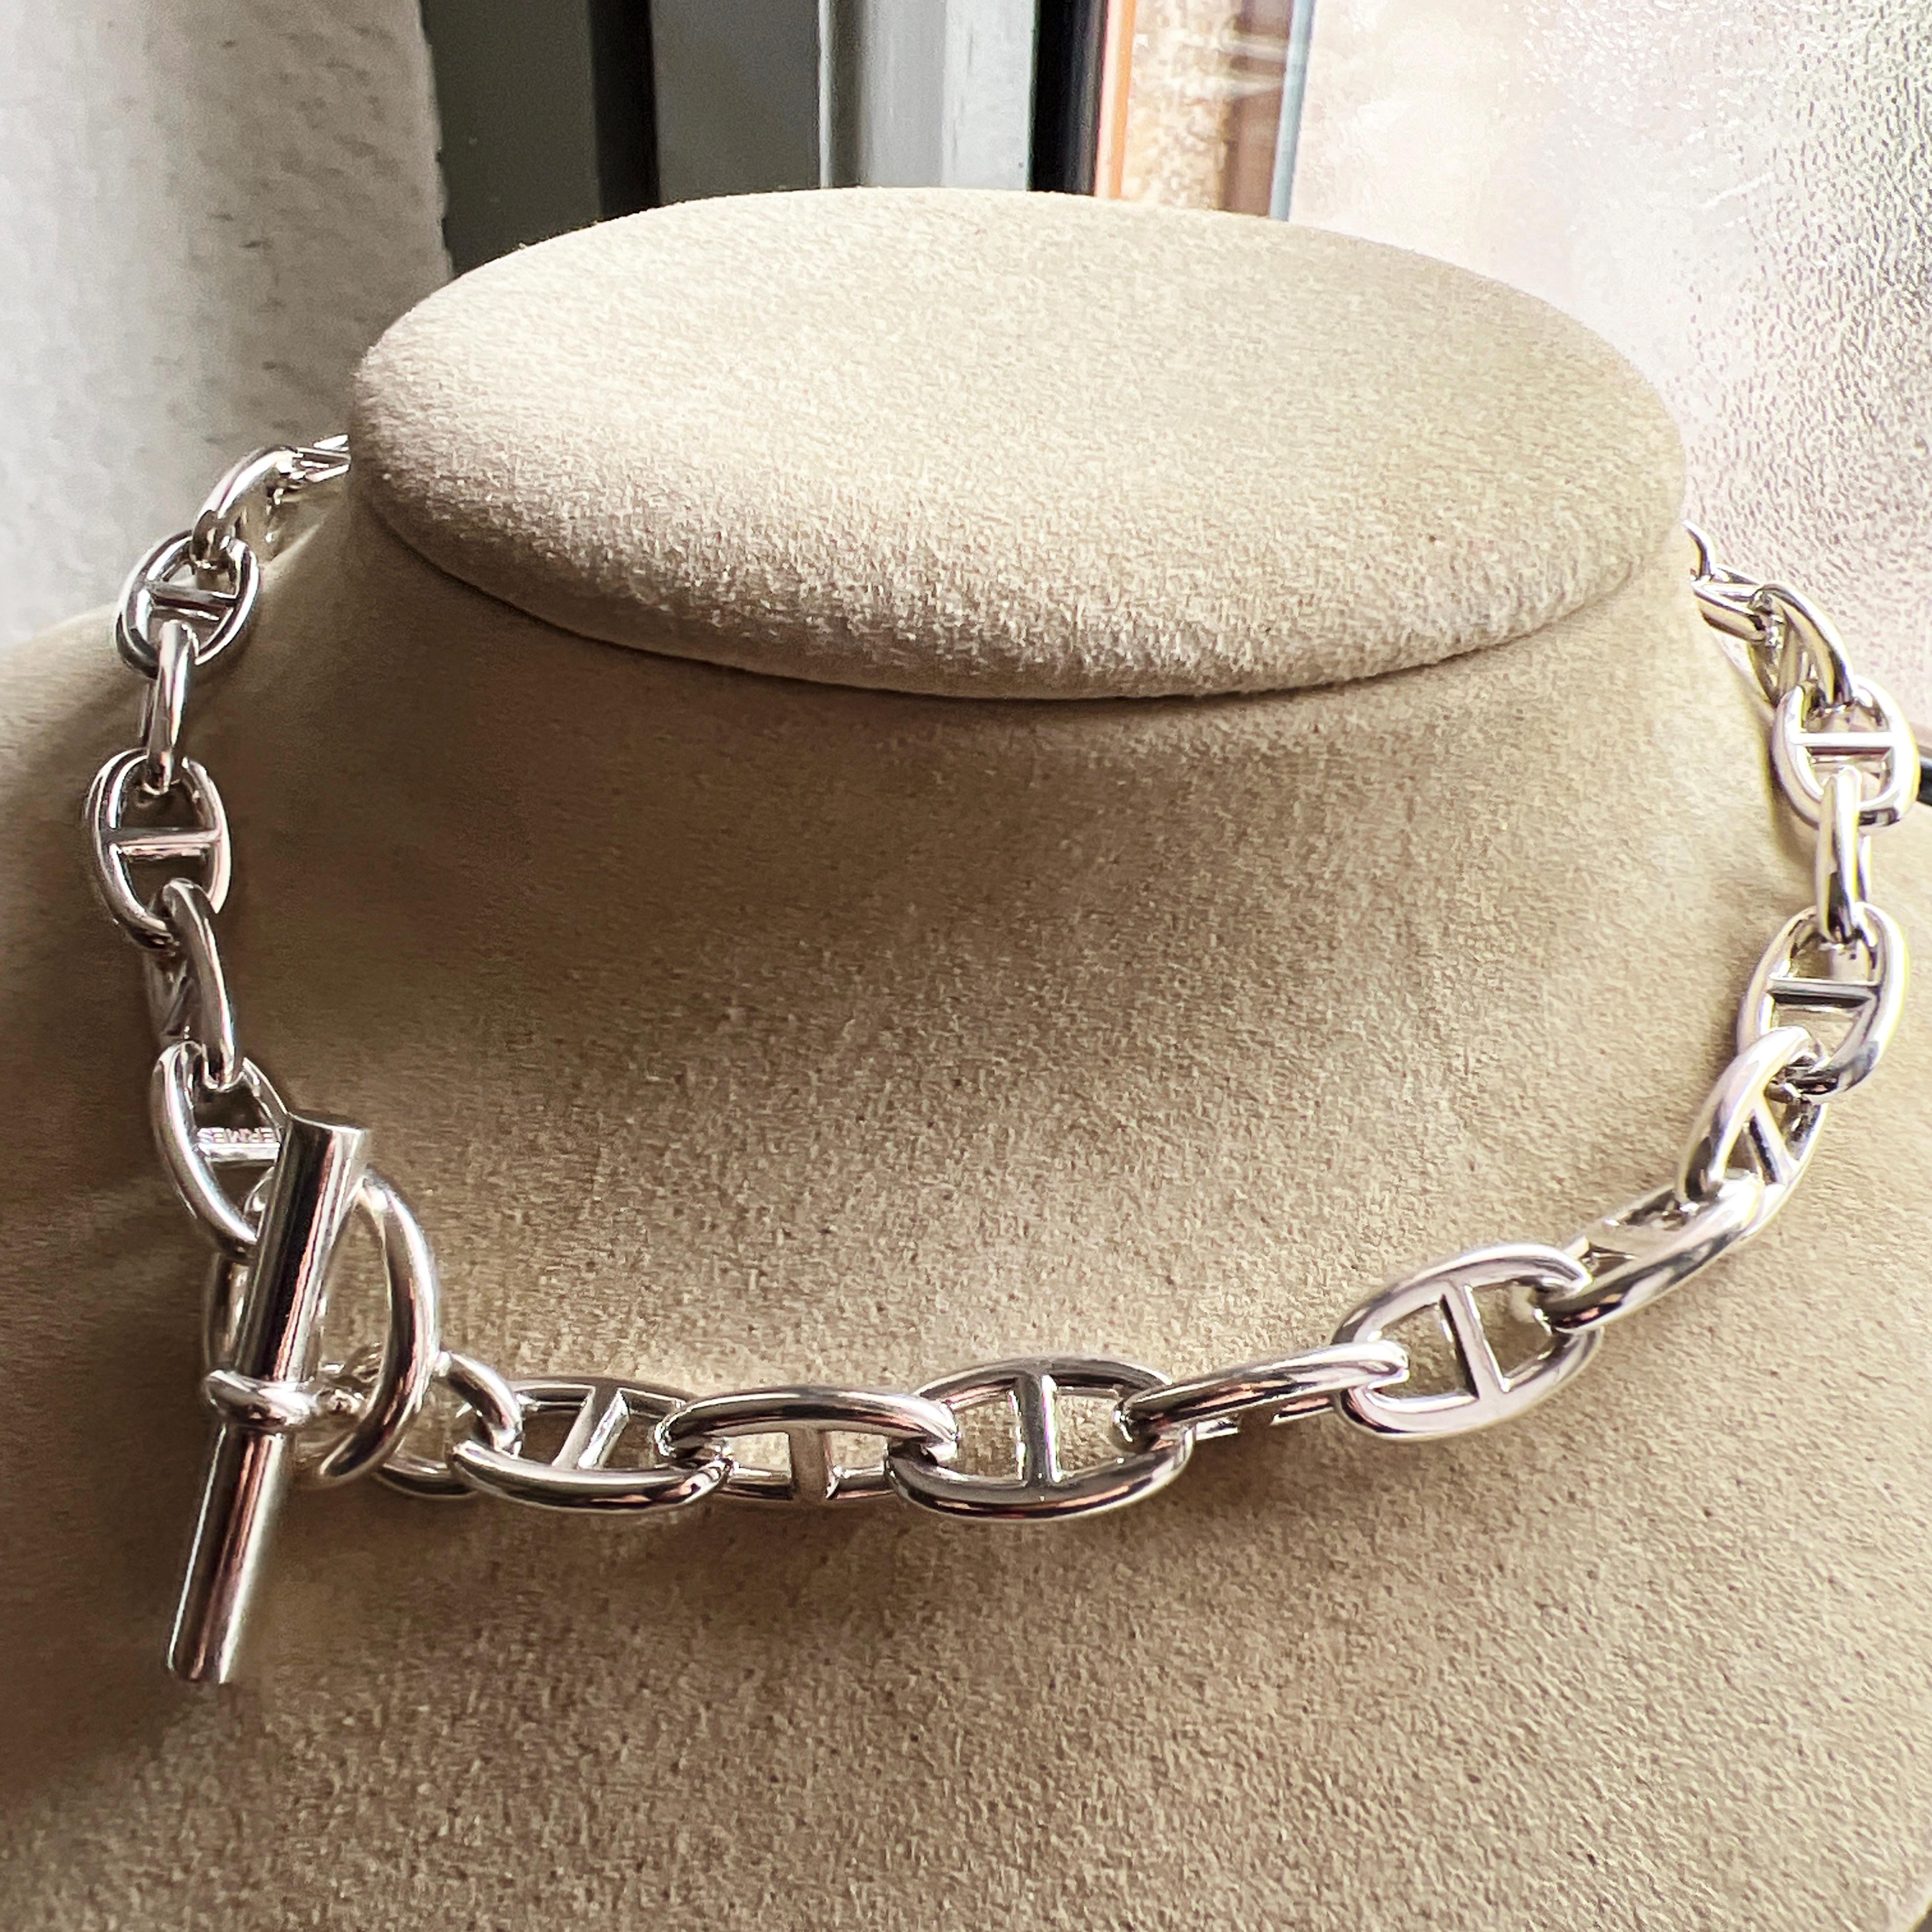 Hermès Chaine D'ancre Sterling Silver Necklace, circa 1995 1